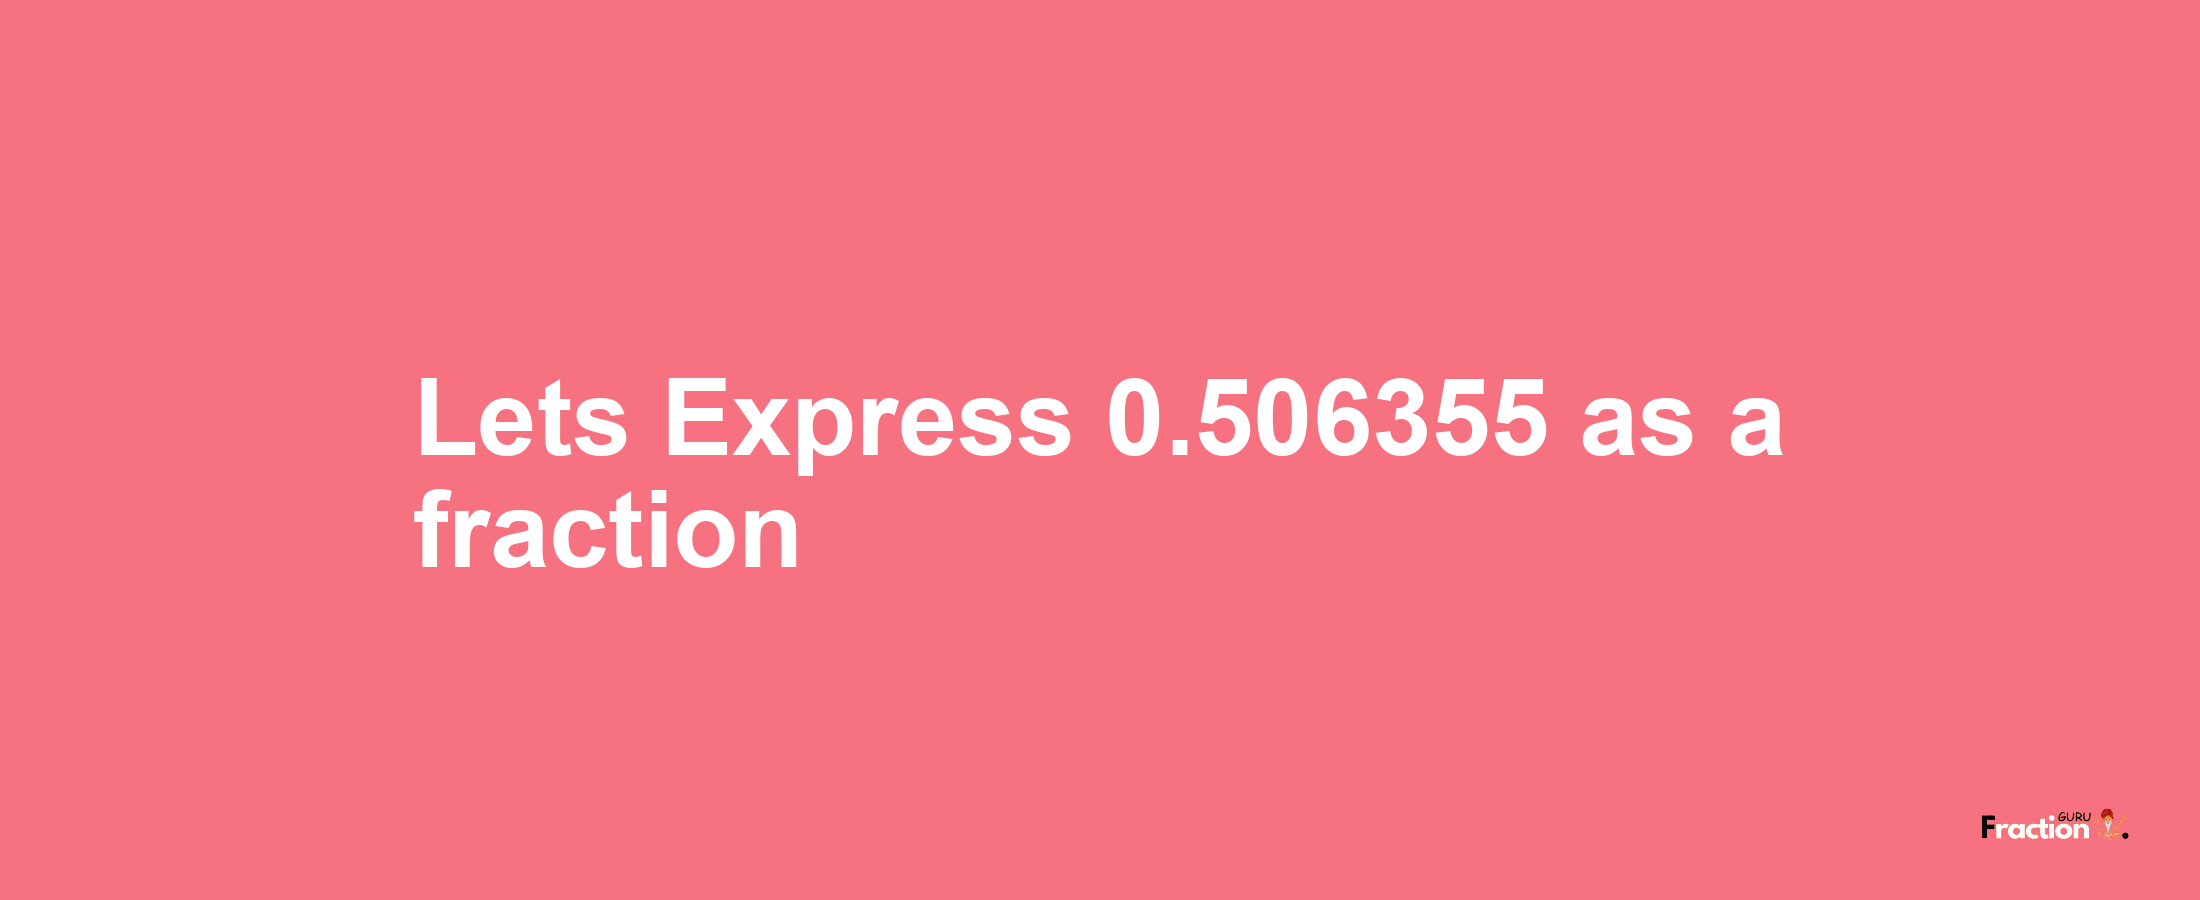 Lets Express 0.506355 as afraction